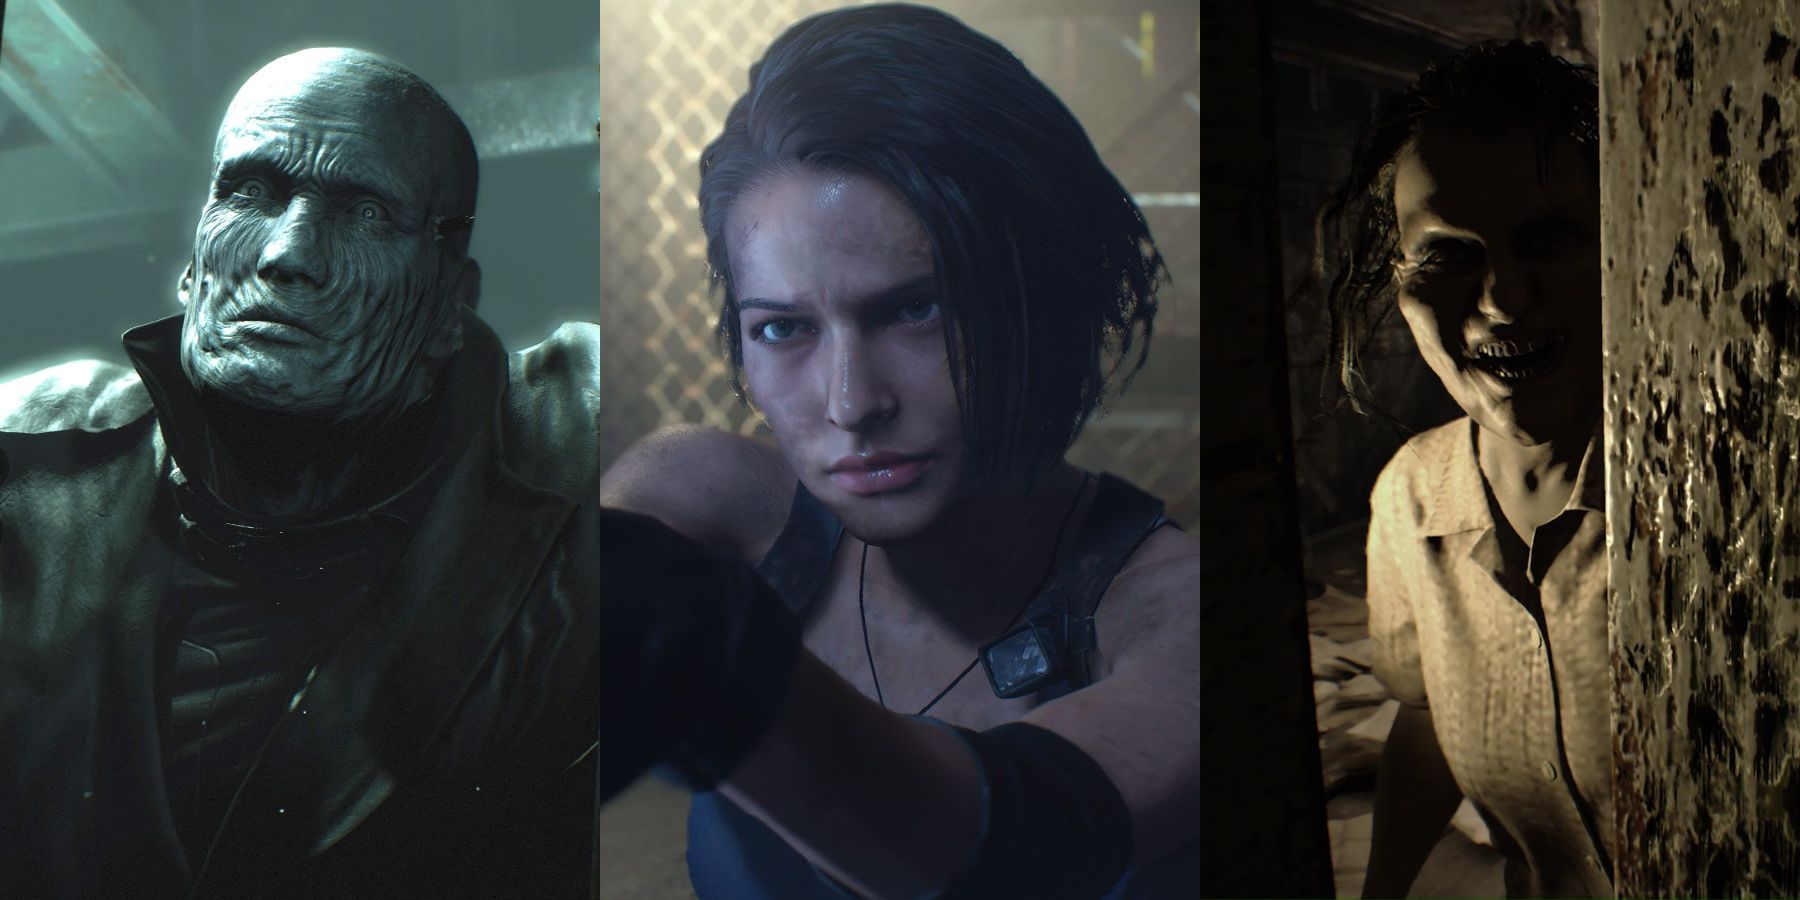 Current-gen upgrades for Resident Evil 2, 3, and 7 may be released during the upcoming Capcom Showcase, according to leaks.